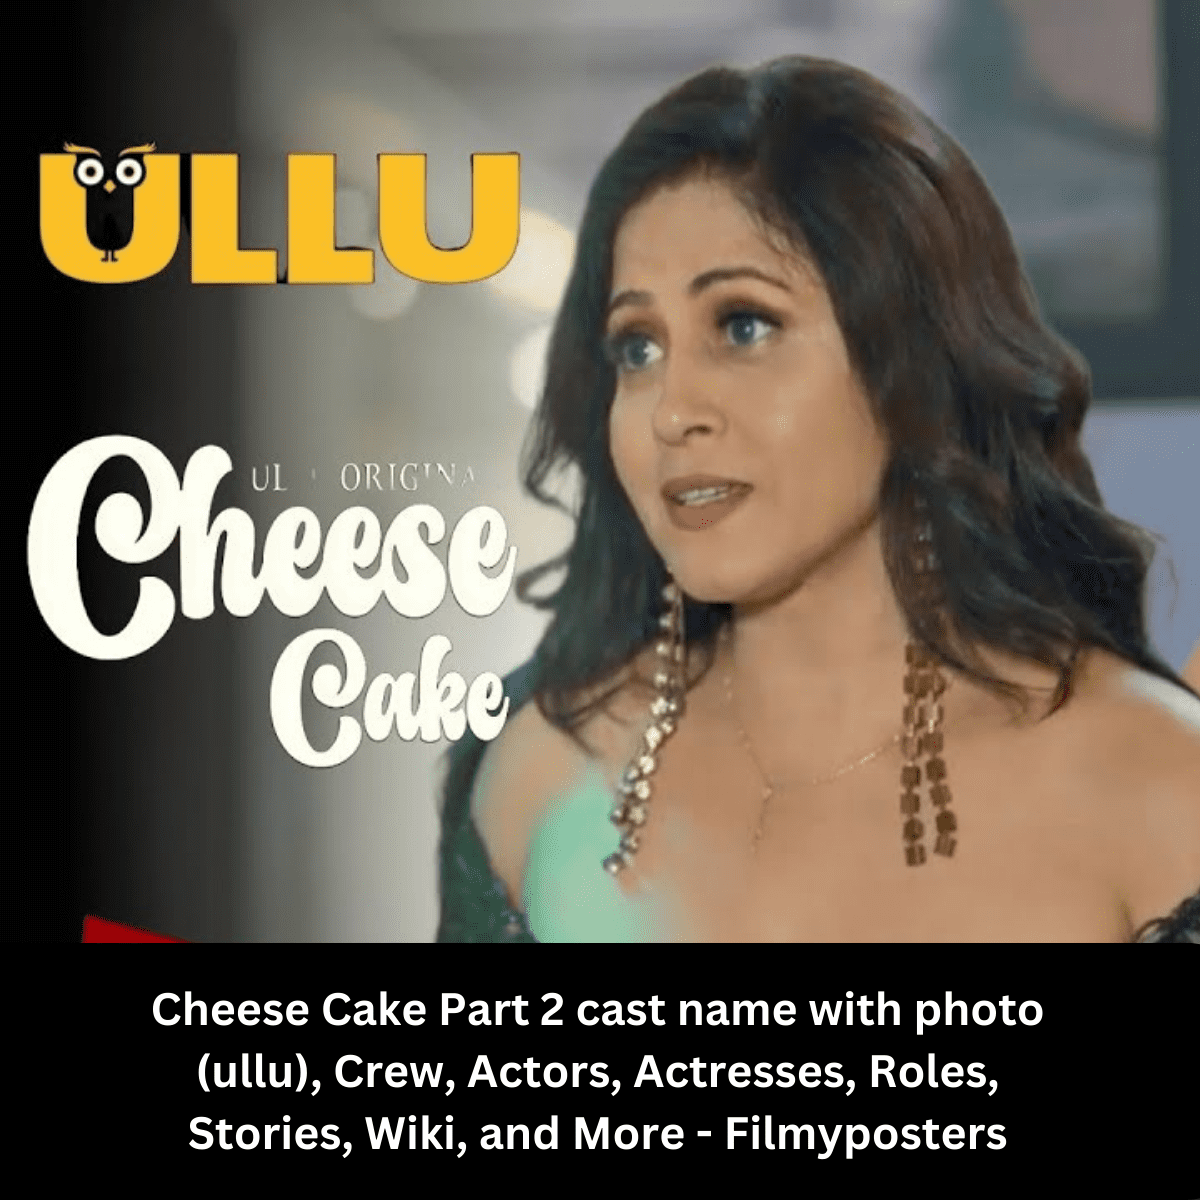 Cheese Cake Part 2 cast name with photo